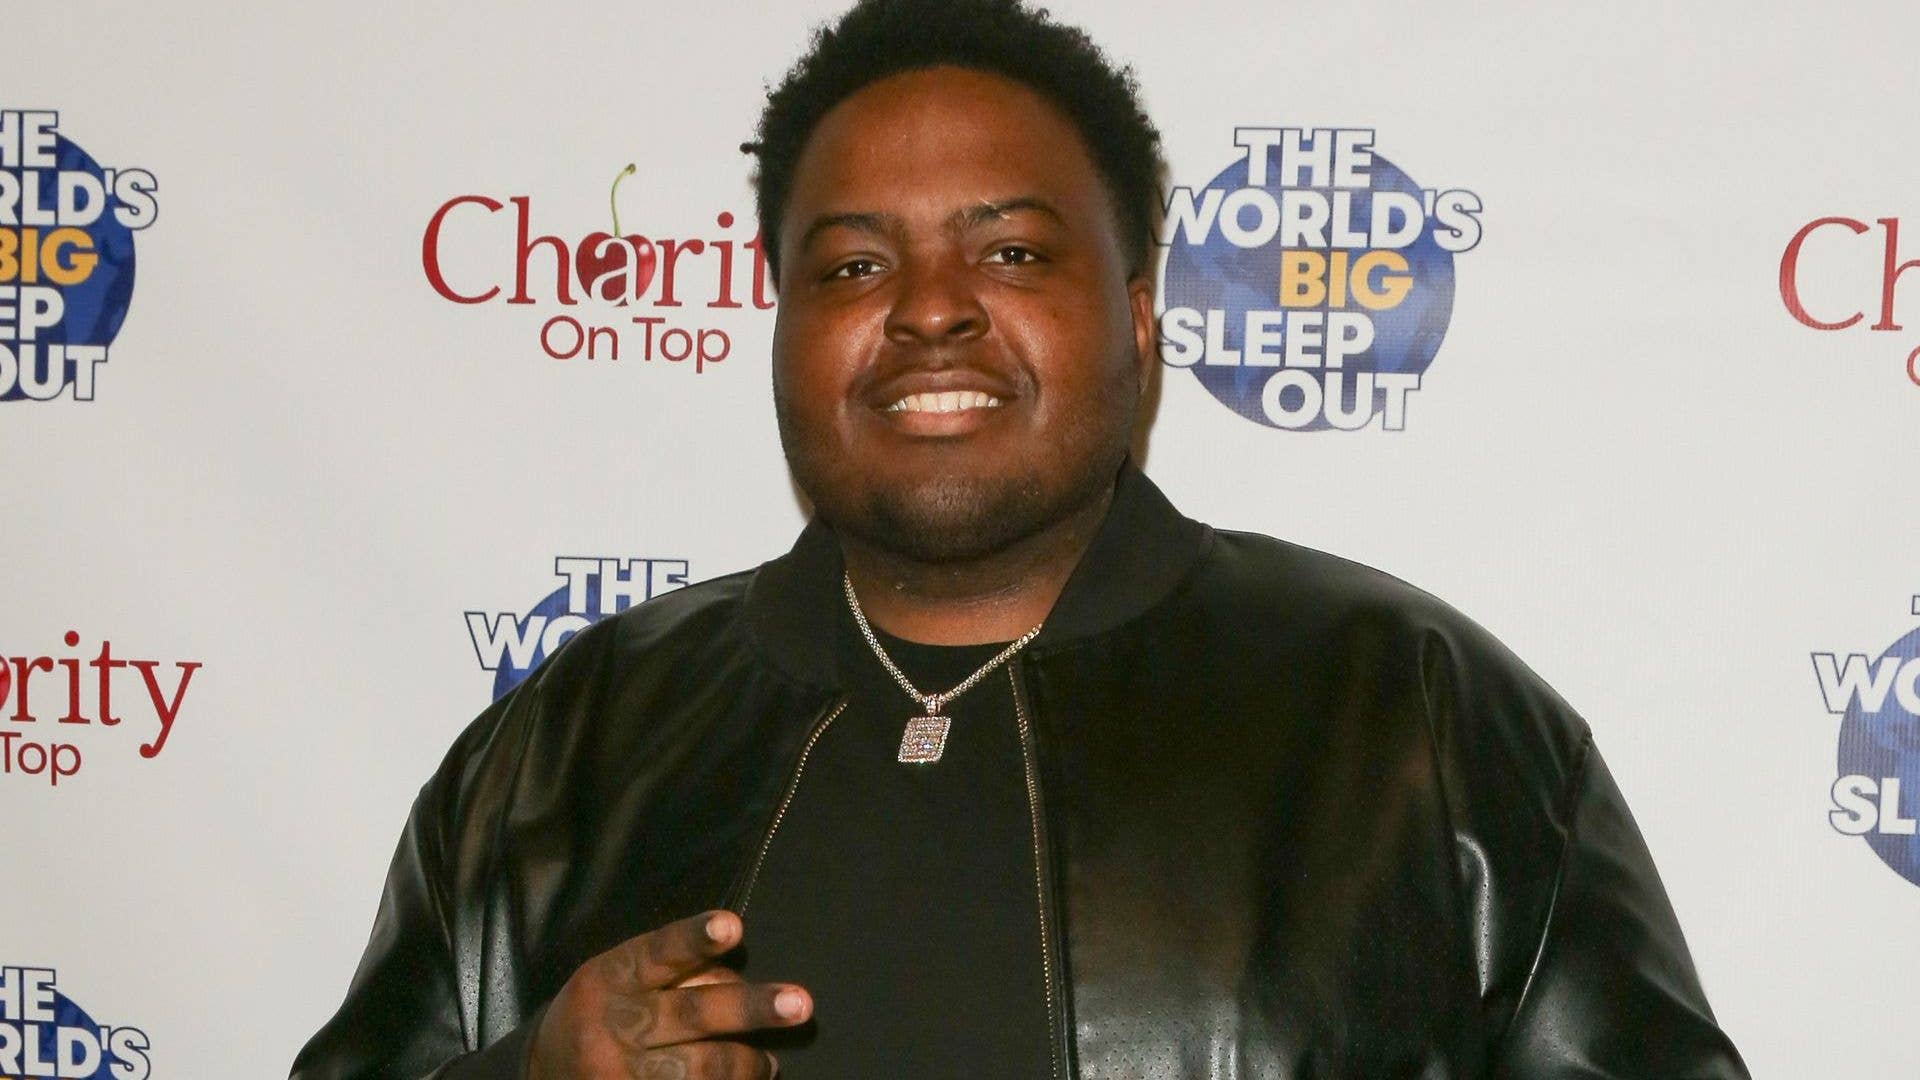 Sean Kingston attends the World's Big Sleep Out